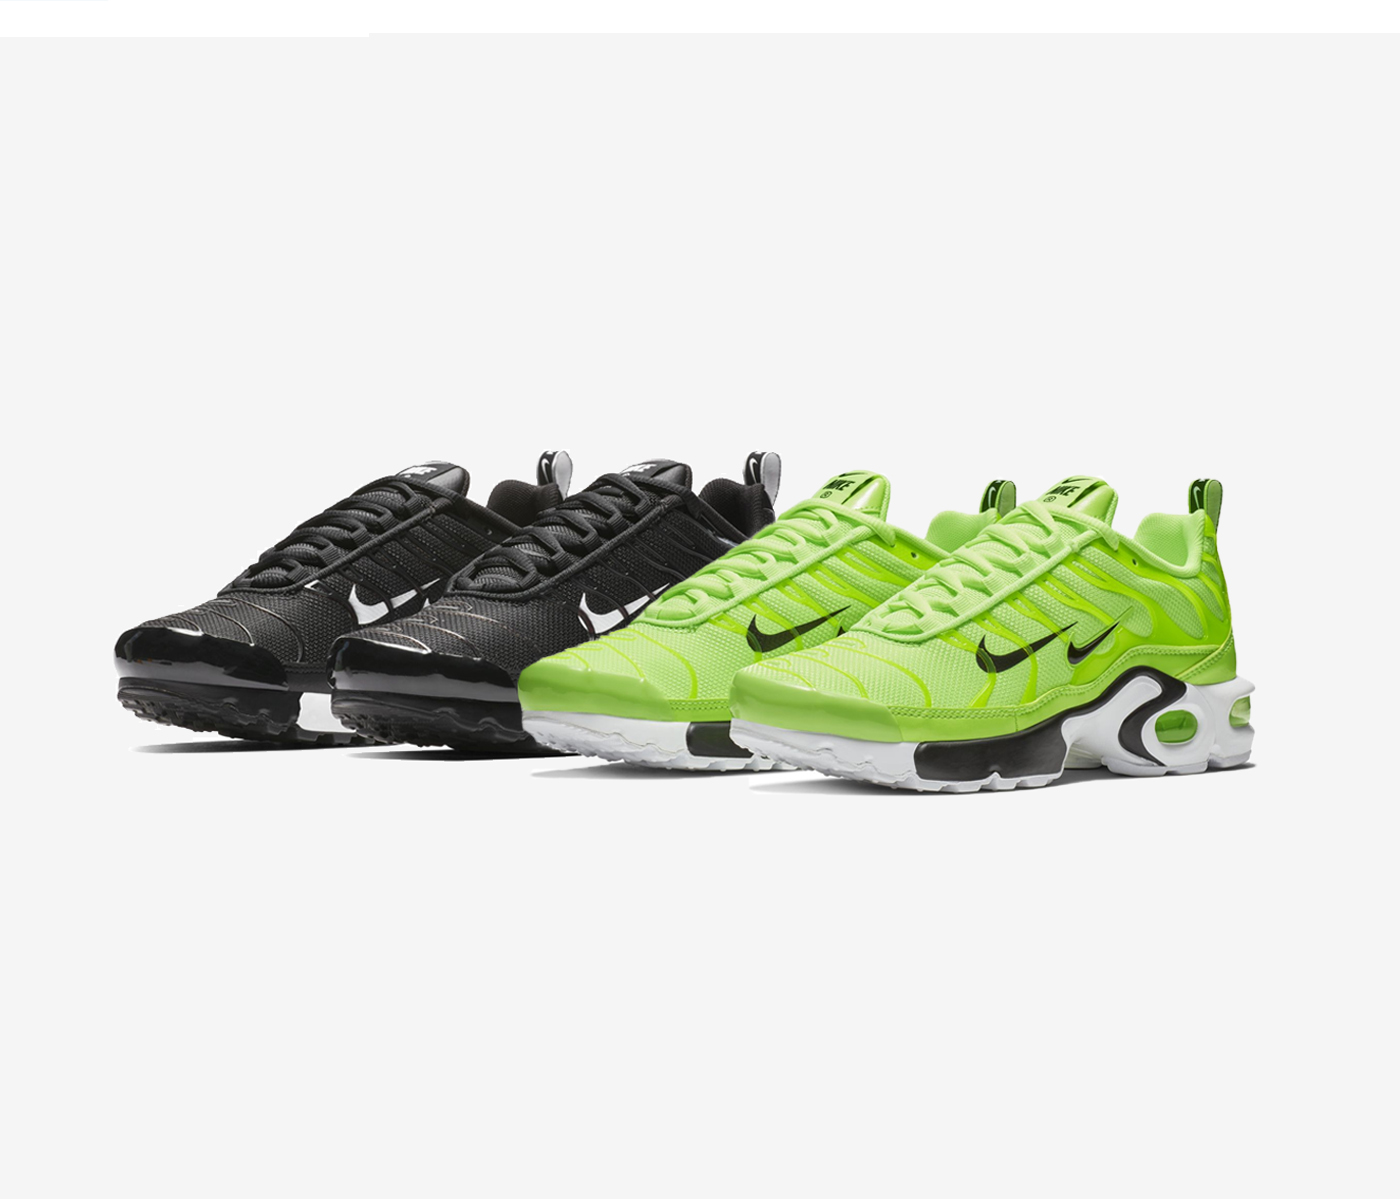 Nike dress its Air Max Plus with a 